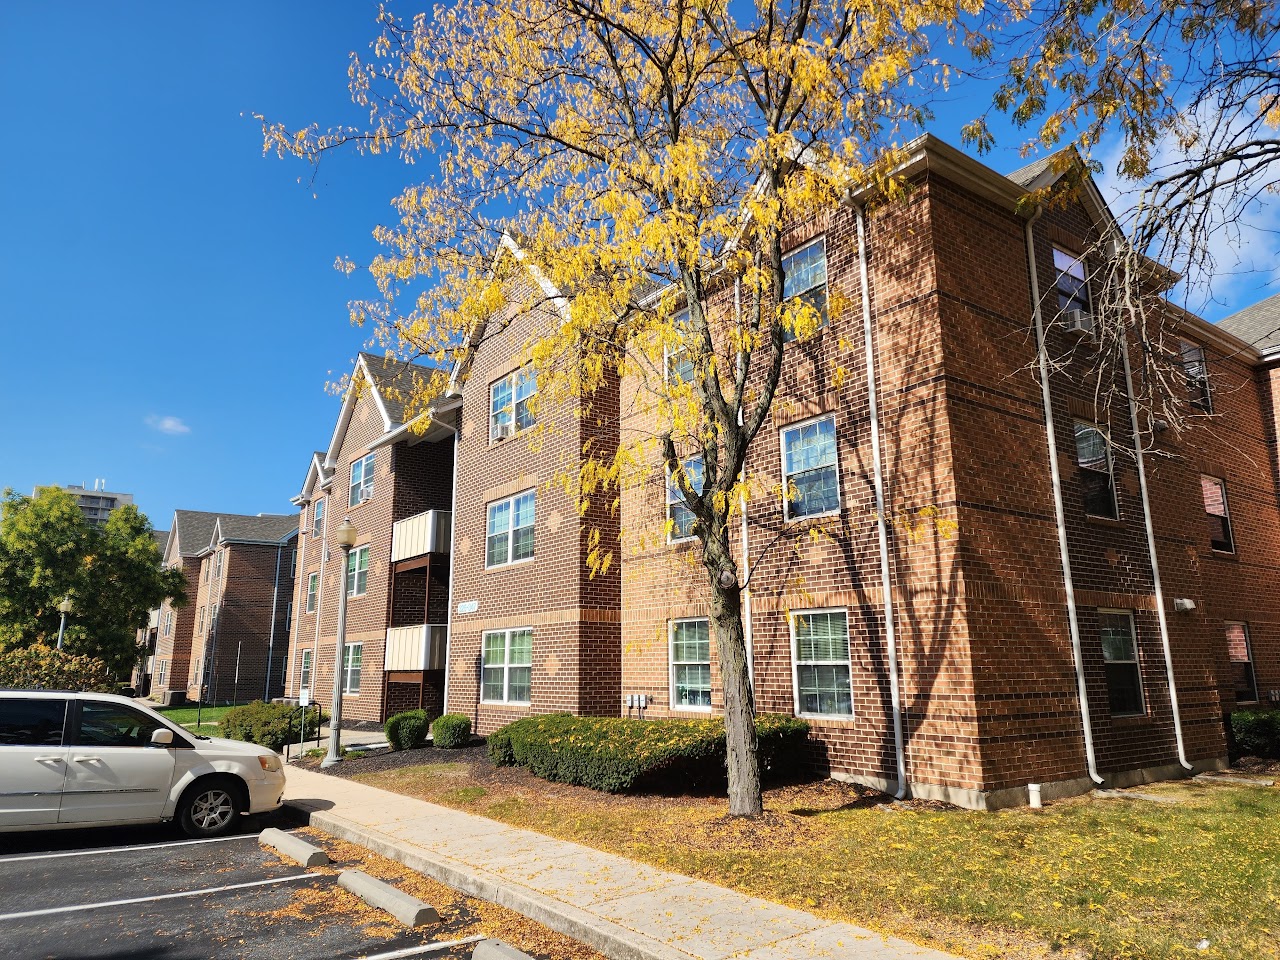 Photo of WASHINGTON SQUARE APTS II. Affordable housing located at 225 MARY ST HARRISBURG, PA 17104